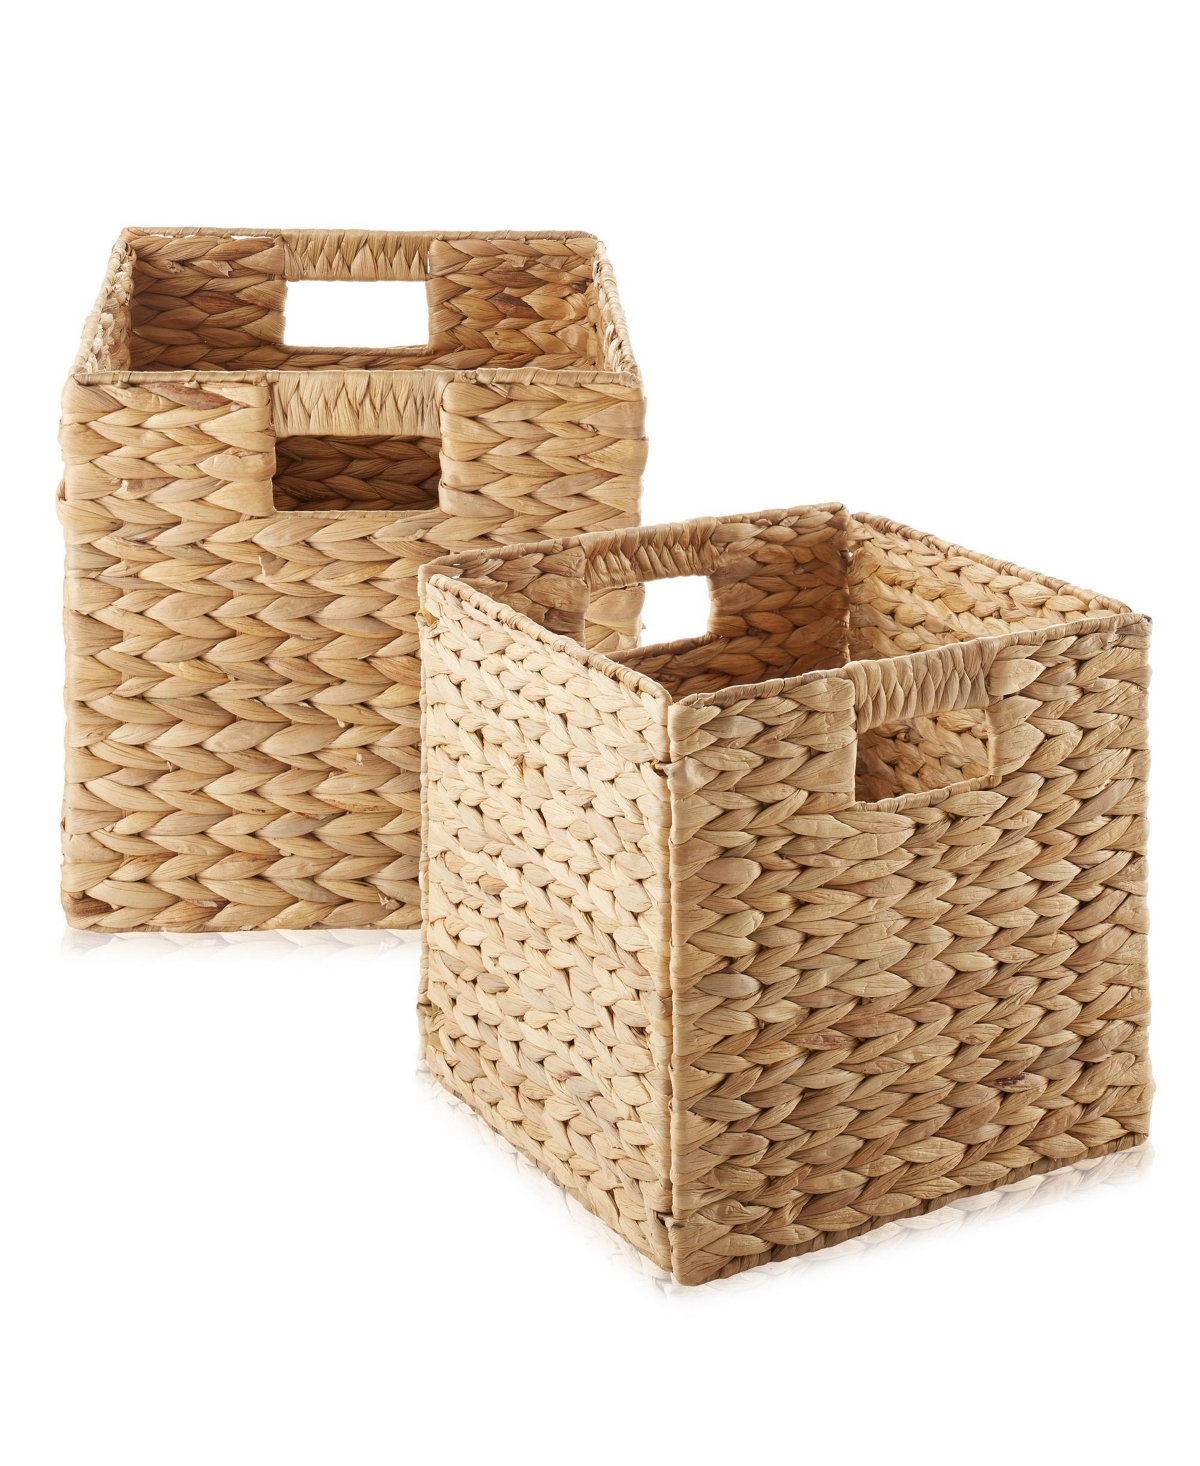 10.5" x 10.5" Water Hyacinth Storage Baskets, Natural - Set of 2 Collapsible Cube Organizers, Woven Bins for Bathroom, Bedroom, Laundry, Pan